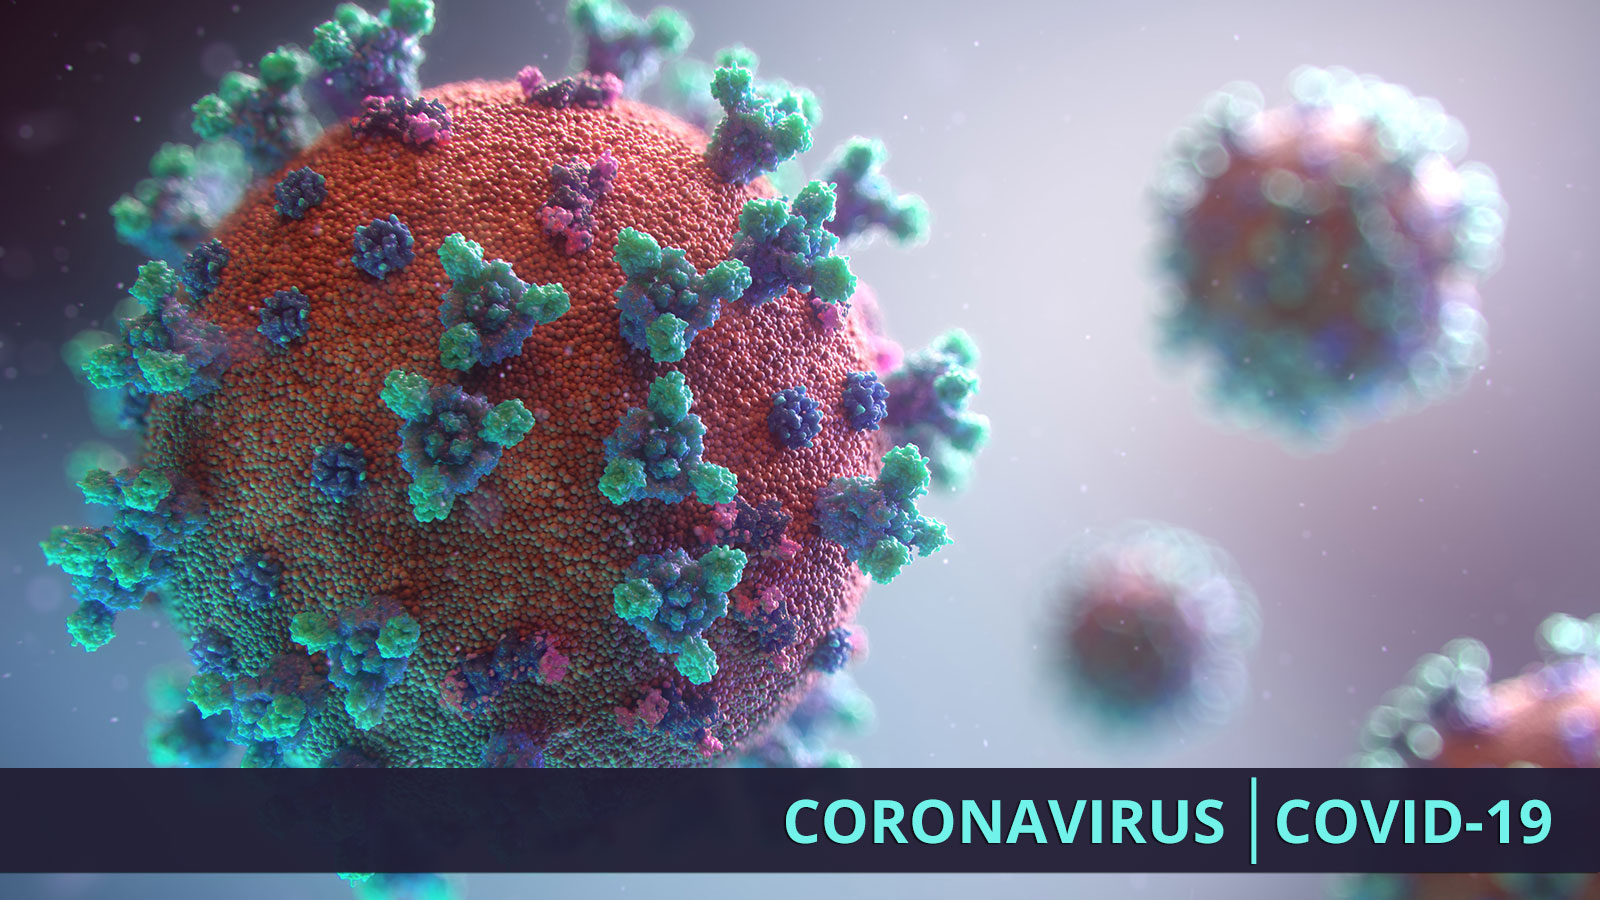 Nature’s fury: Man Vs Corona Virus – Can we deal with it?